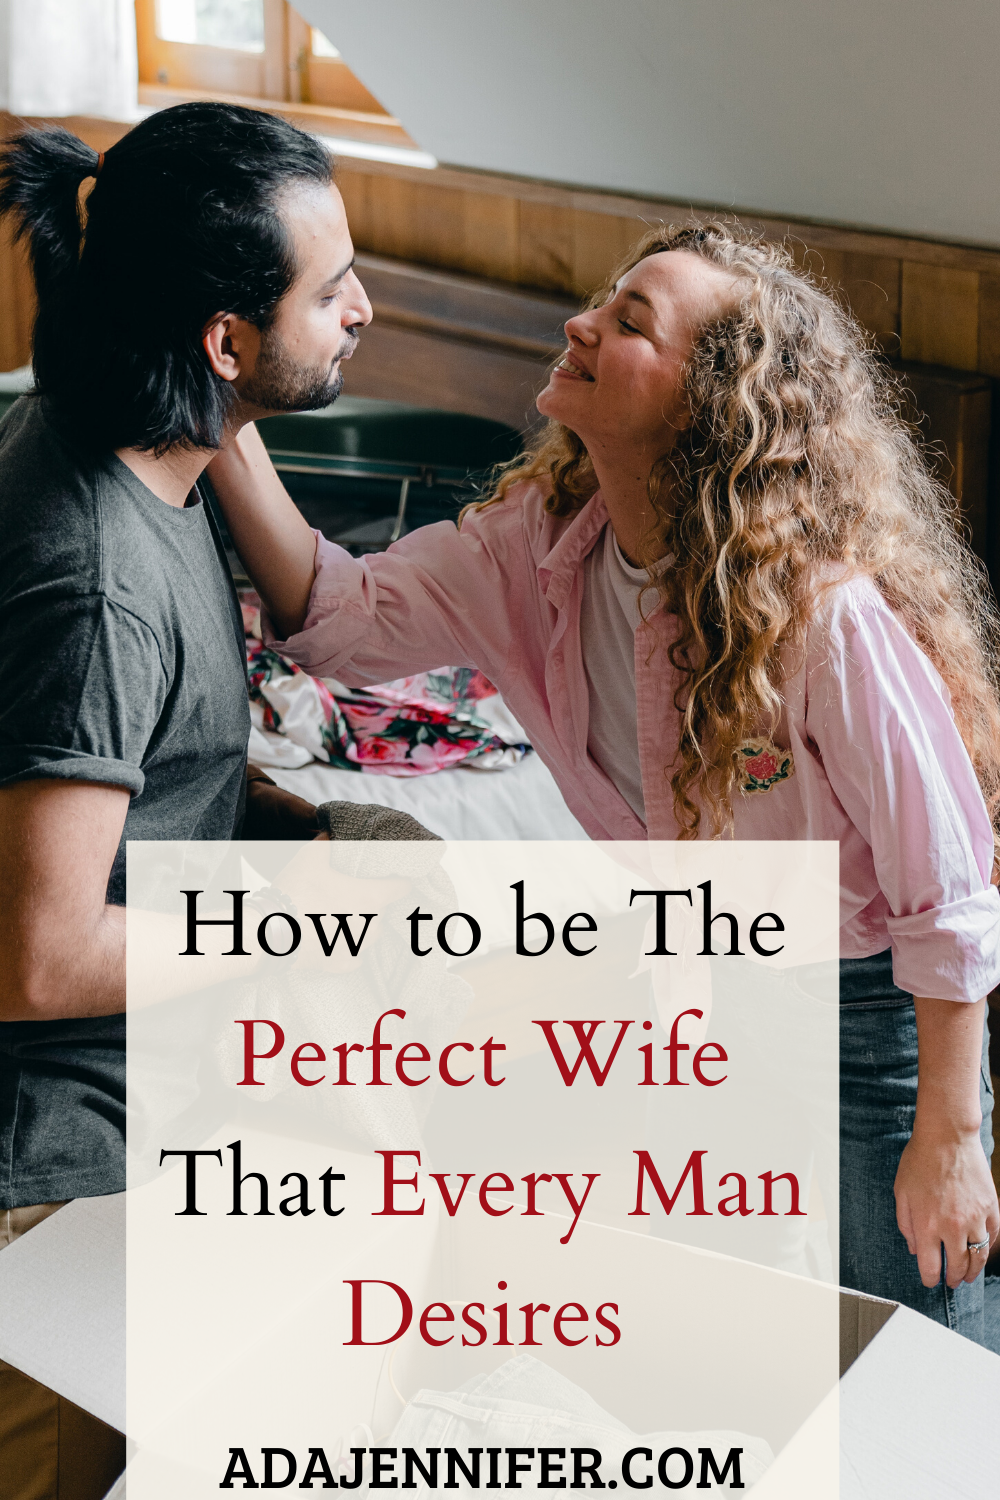 How to be a good wife and mother